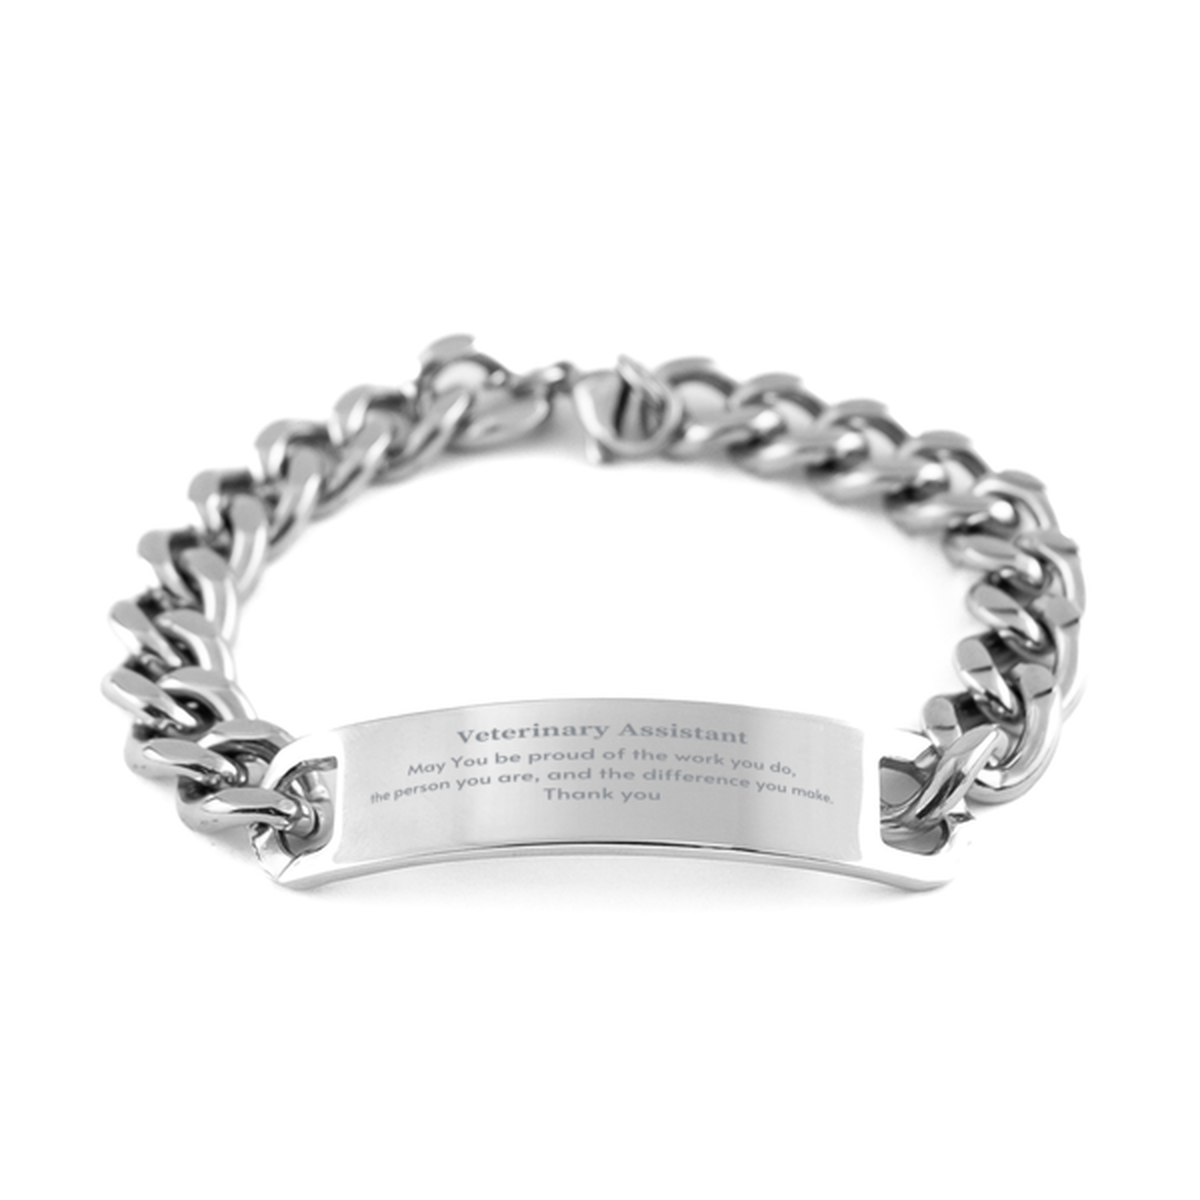 Heartwarming Cuban Chain Stainless Steel Bracelet Retirement Coworkers Gifts for Veterinary Assistant, Veterinary Assistant May You be proud of the work you do, the person you are Gifts for Boss Men Women Friends